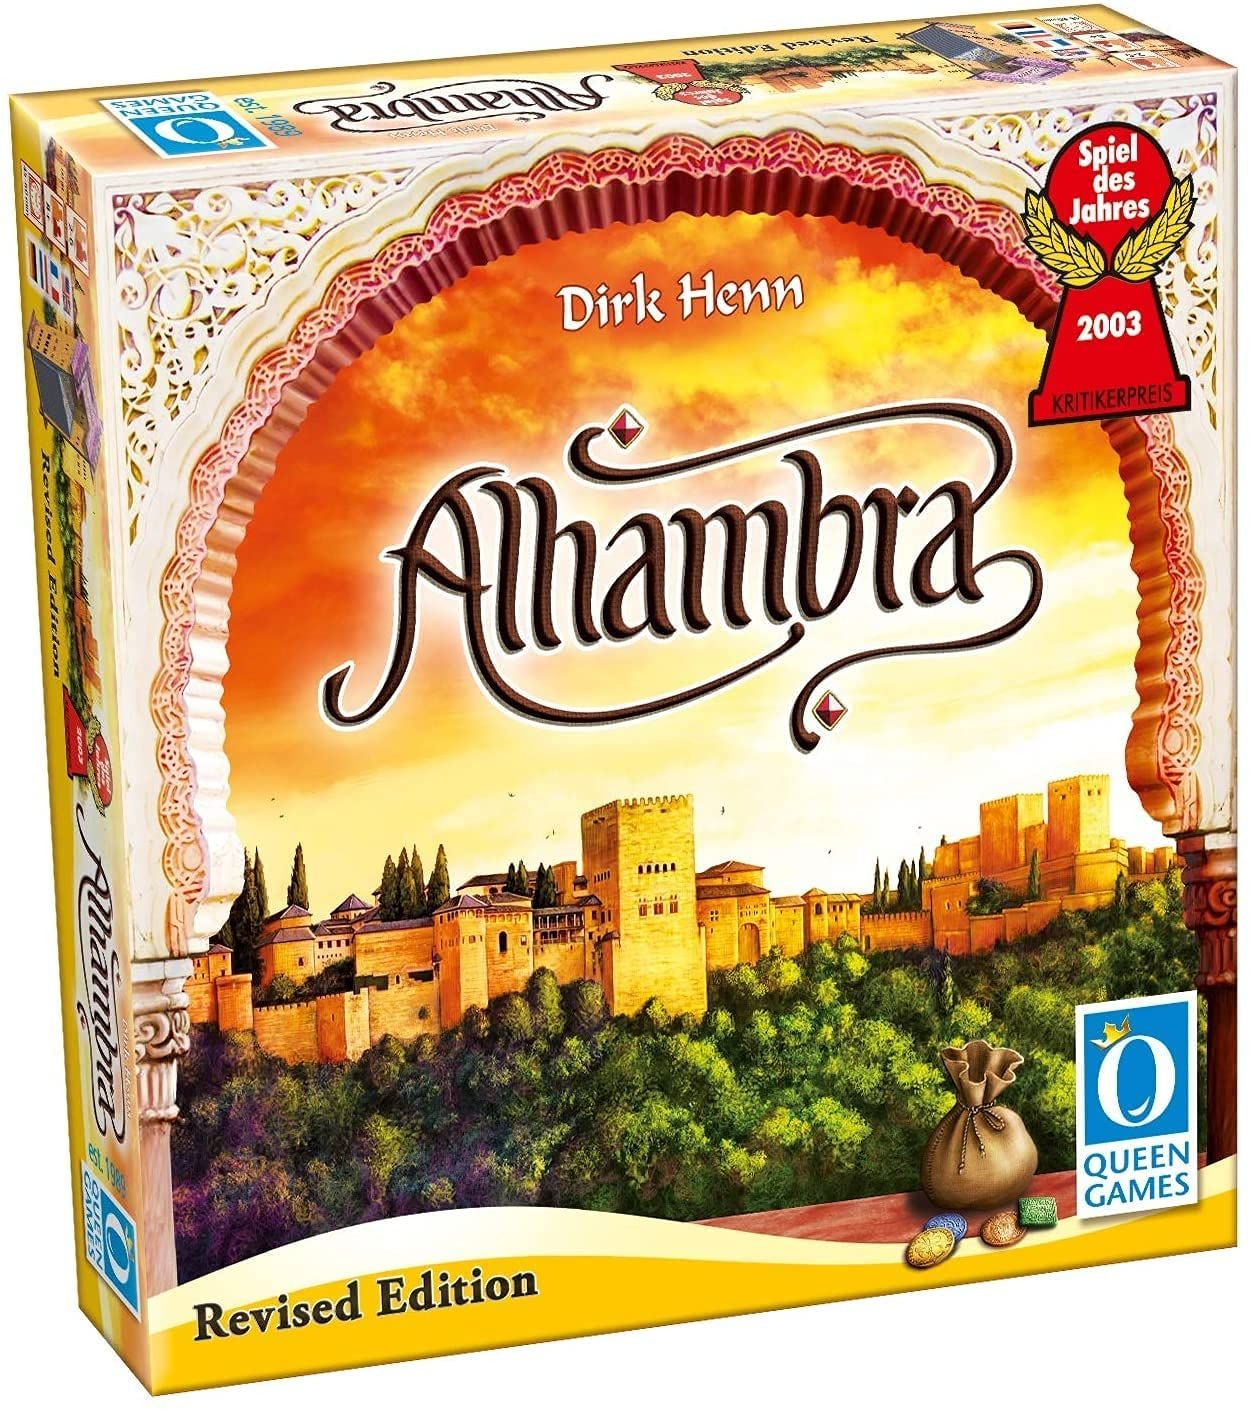 Alhambra: Revised Edition game box.